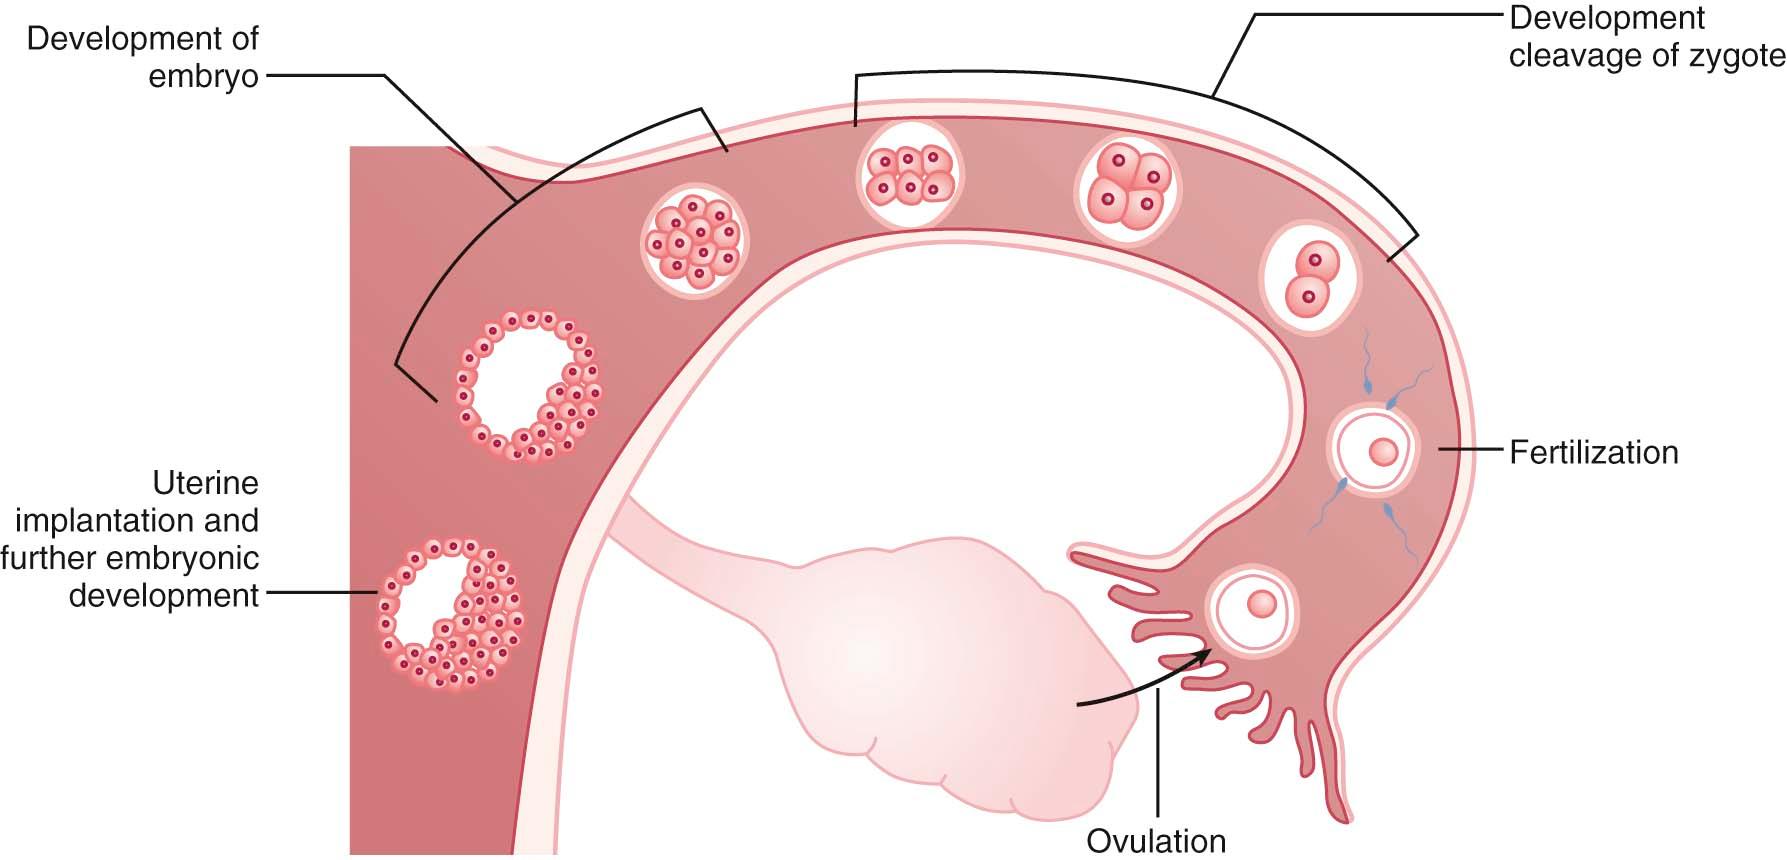 FIGURE 34-1, Sequence of events necessary for fertility: ovulation, fertilization, cleavage of zygote, continued embryo development, and implantation in the uterine cavity.